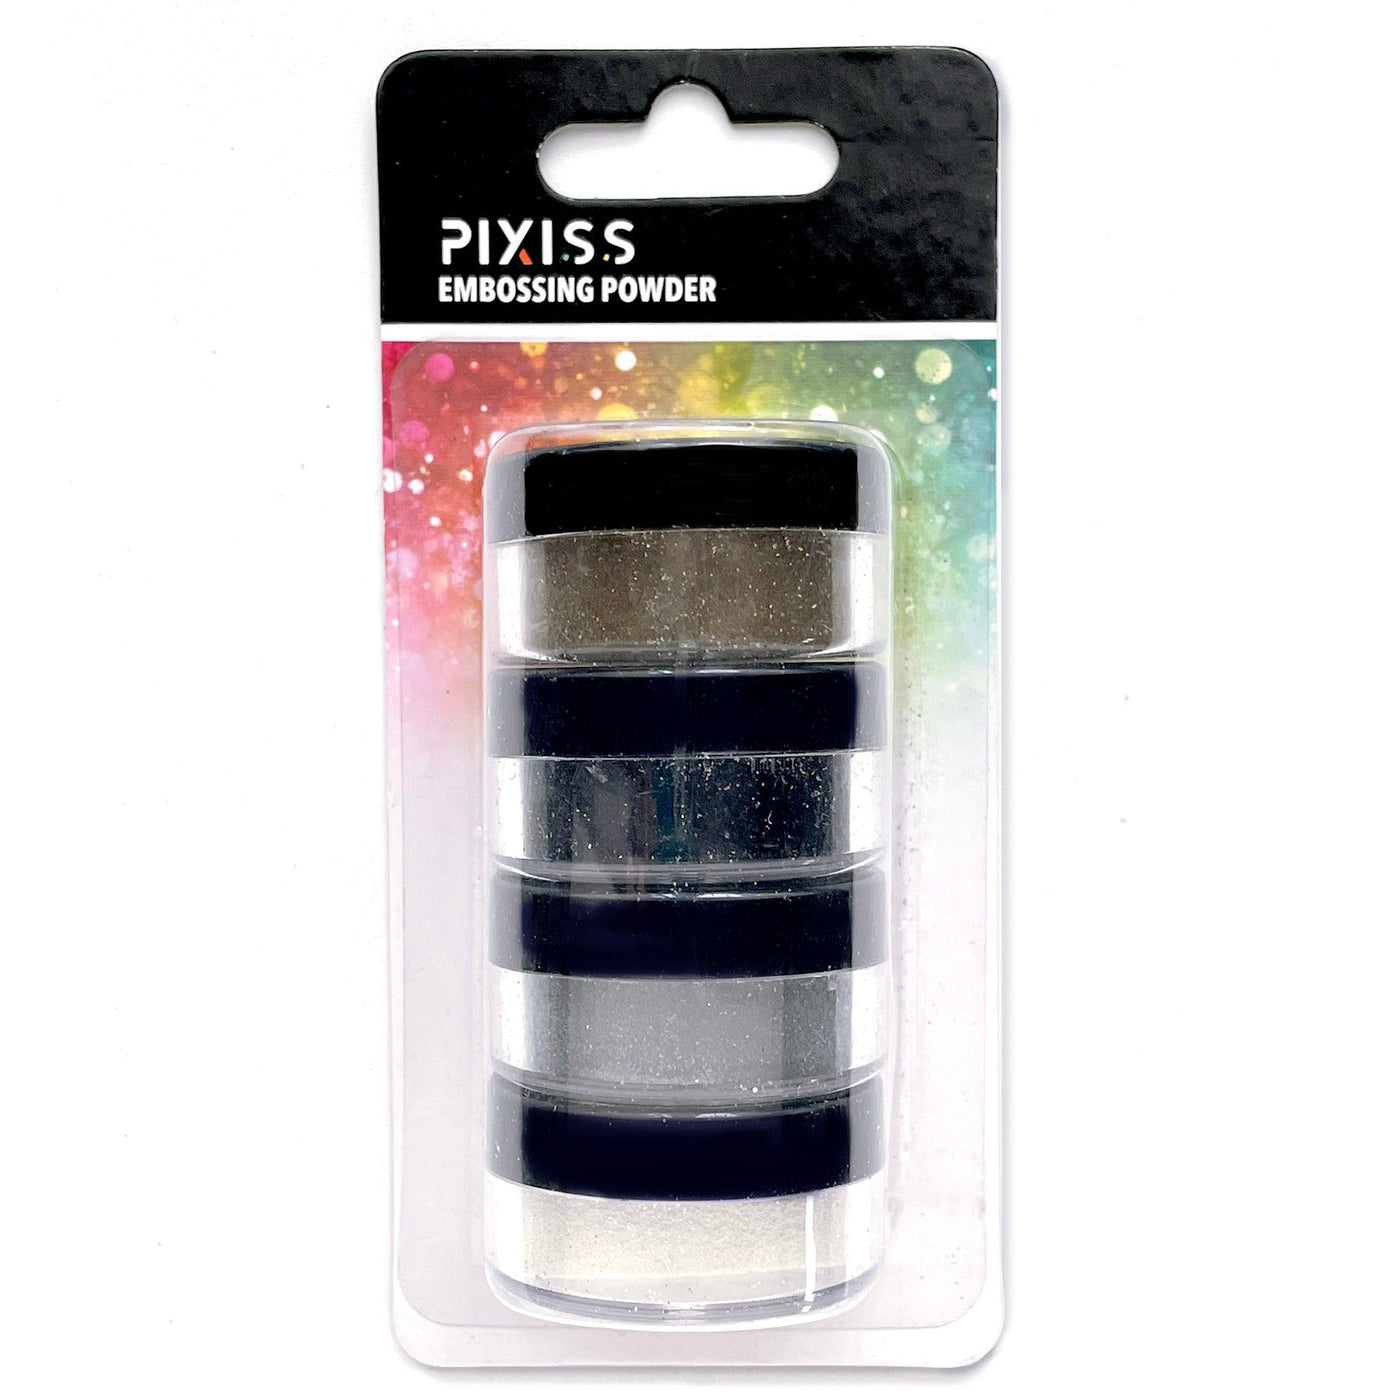 PIXISS Embossing Powders Set of 4 Colors by Pixiss - Vysn